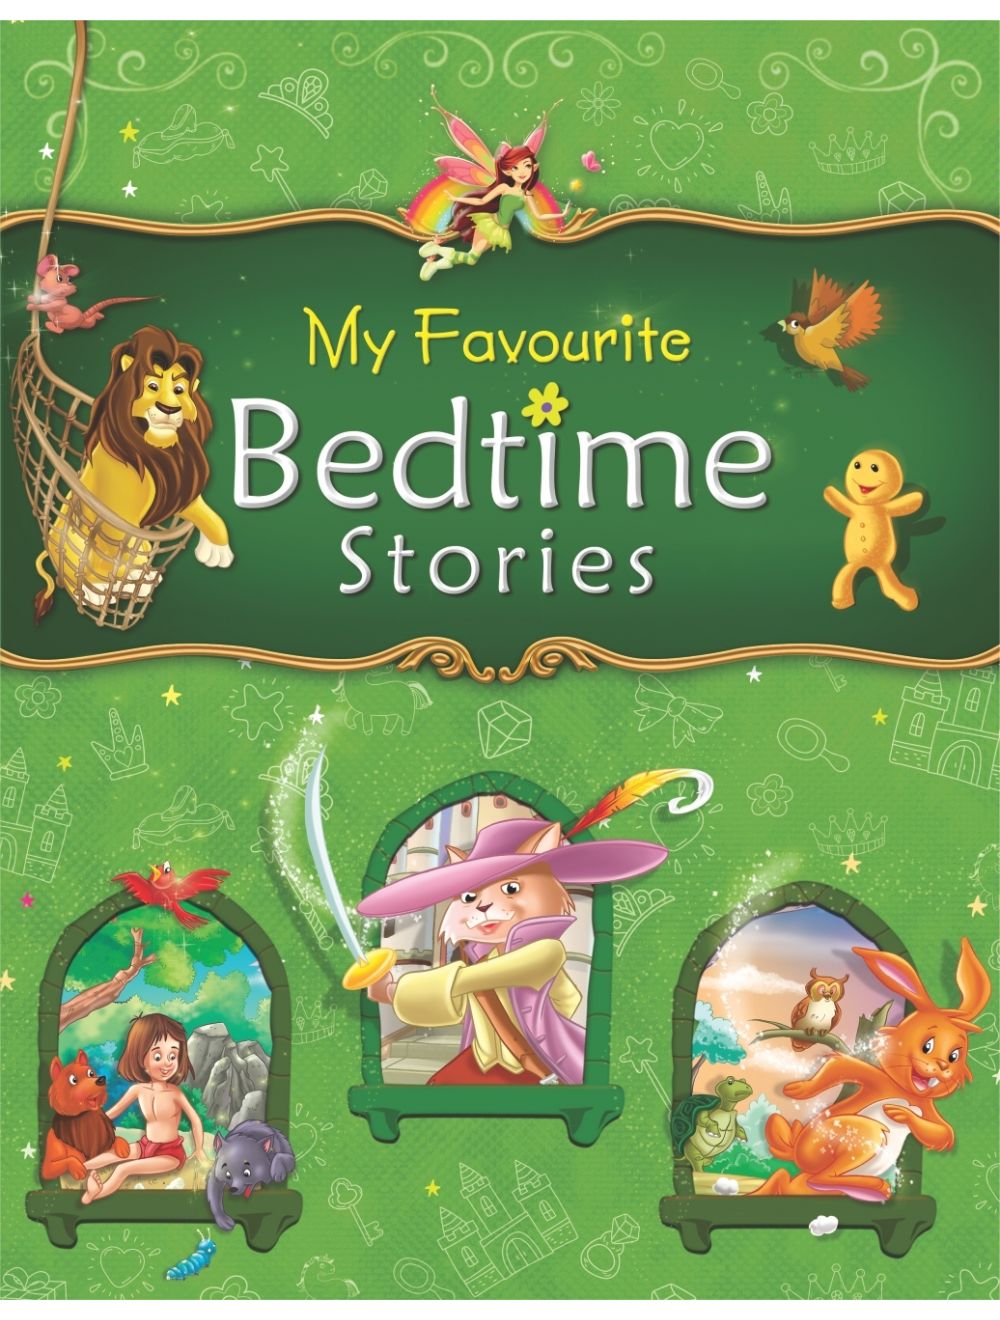 My Favourite Bedtime Stories